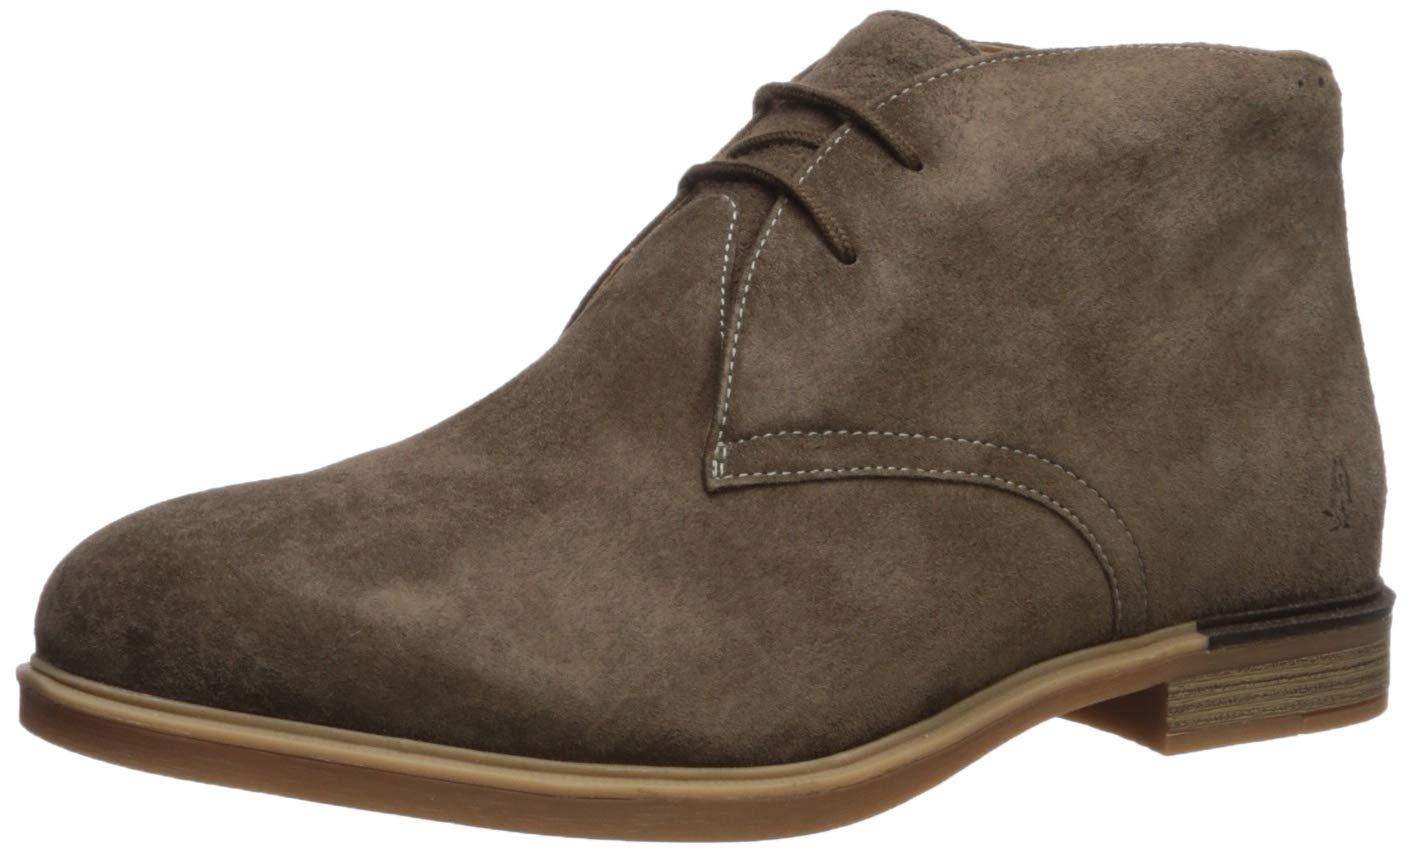 Hush Puppies Bailey Chukka Boot Mushroom Suede 5.5 in Black Suede (Black) -  Save 55% - Lyst